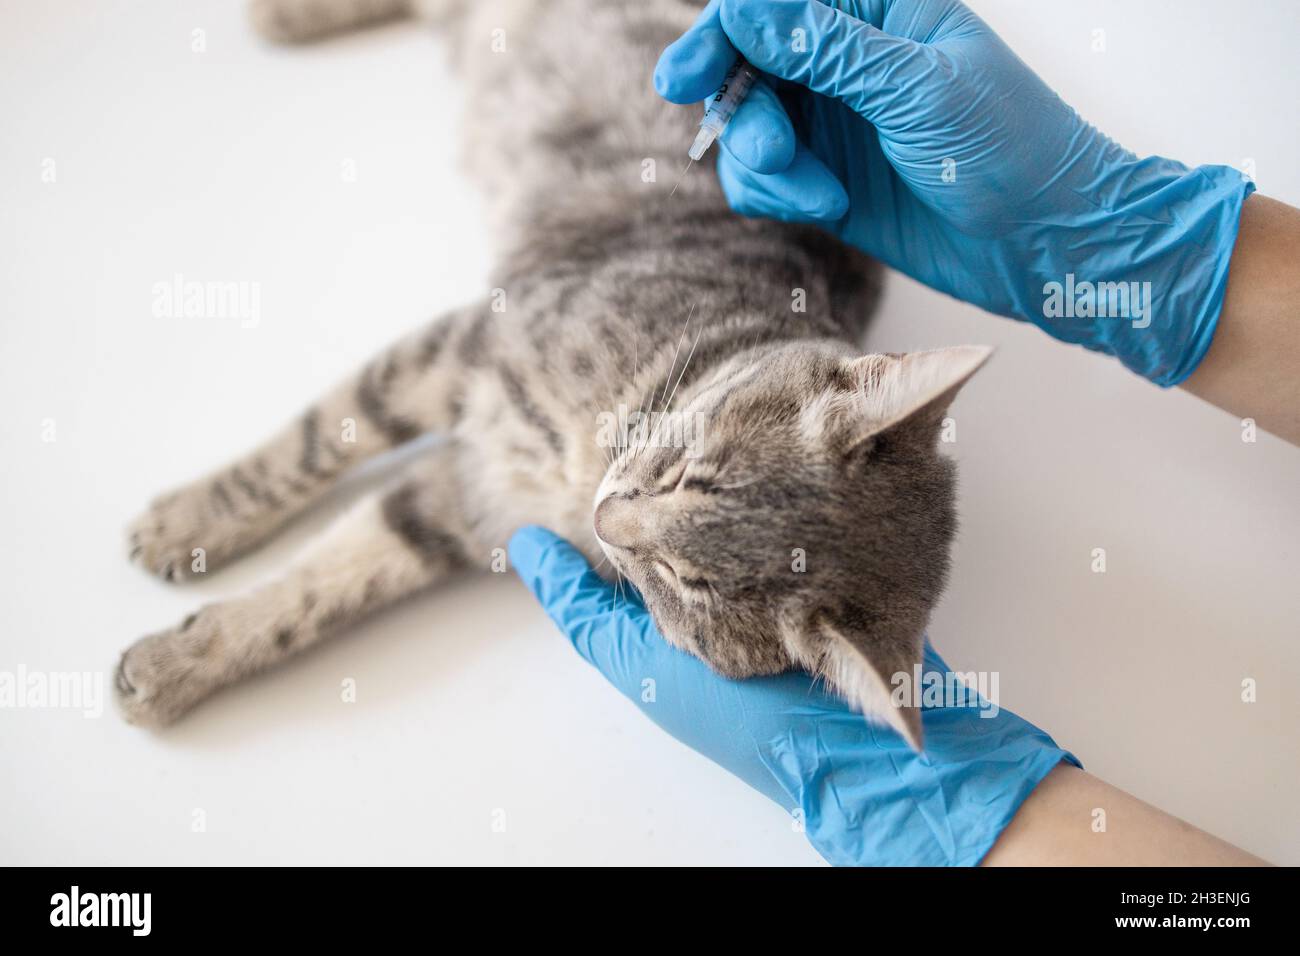 Veterinary doctor giving injection for kitten. Vaccination of animals. Domestic pet cat for examination in a vet clinic, hands of a veterinarian. Stock Photo